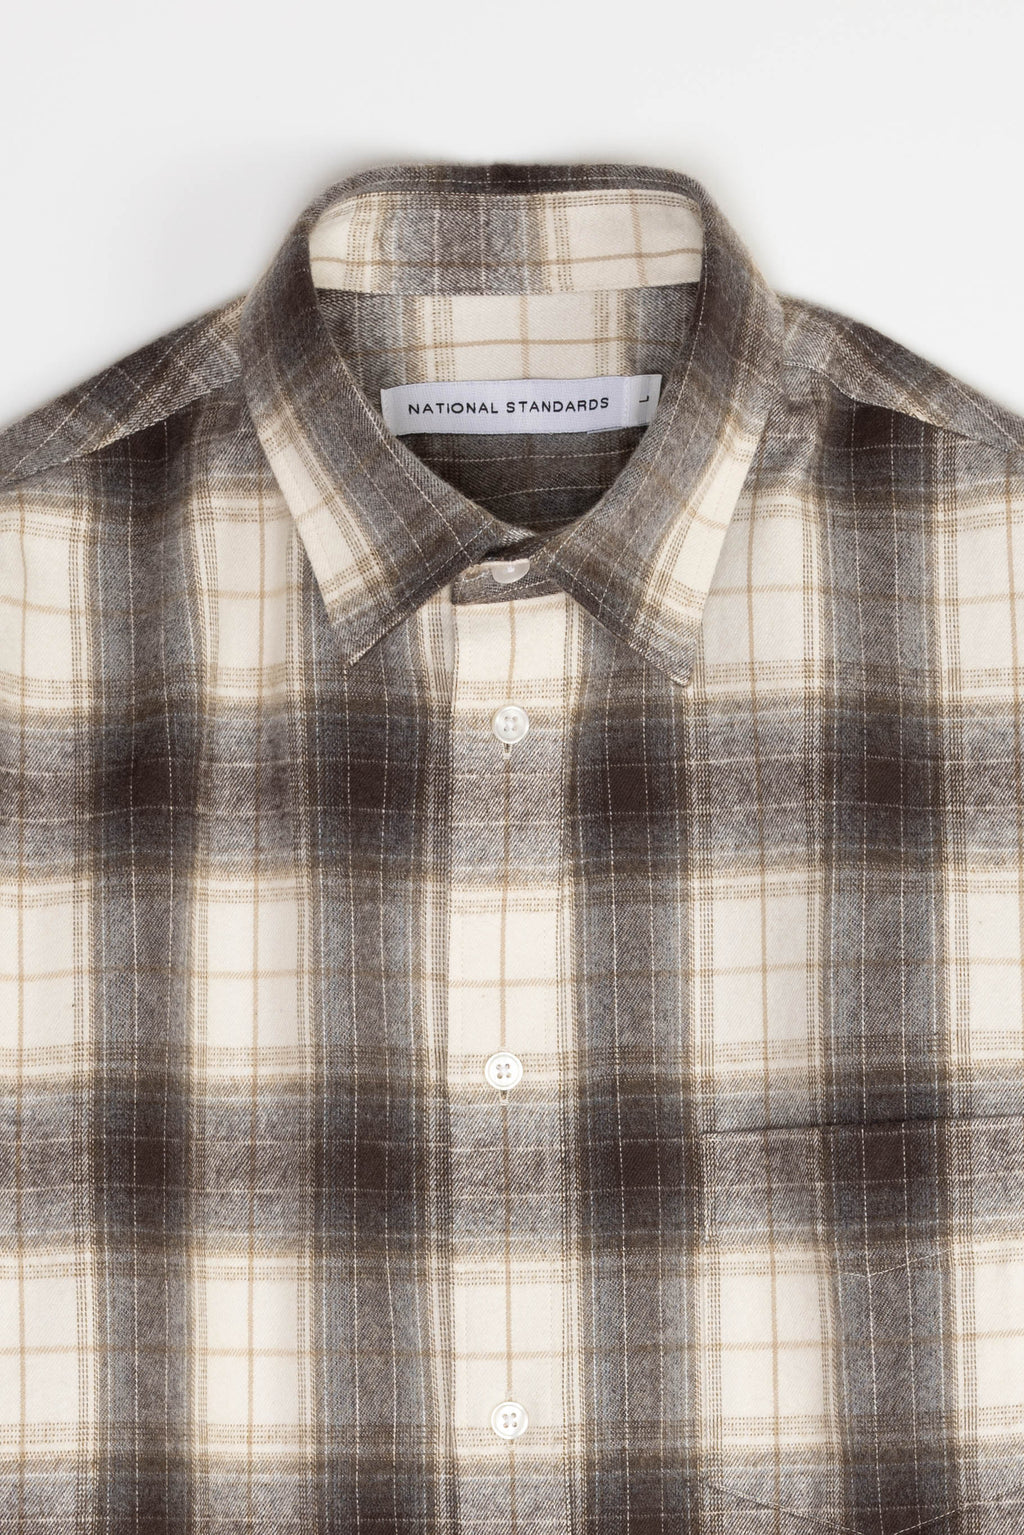 Japanese Shaggy Plaid in Brown and White 06